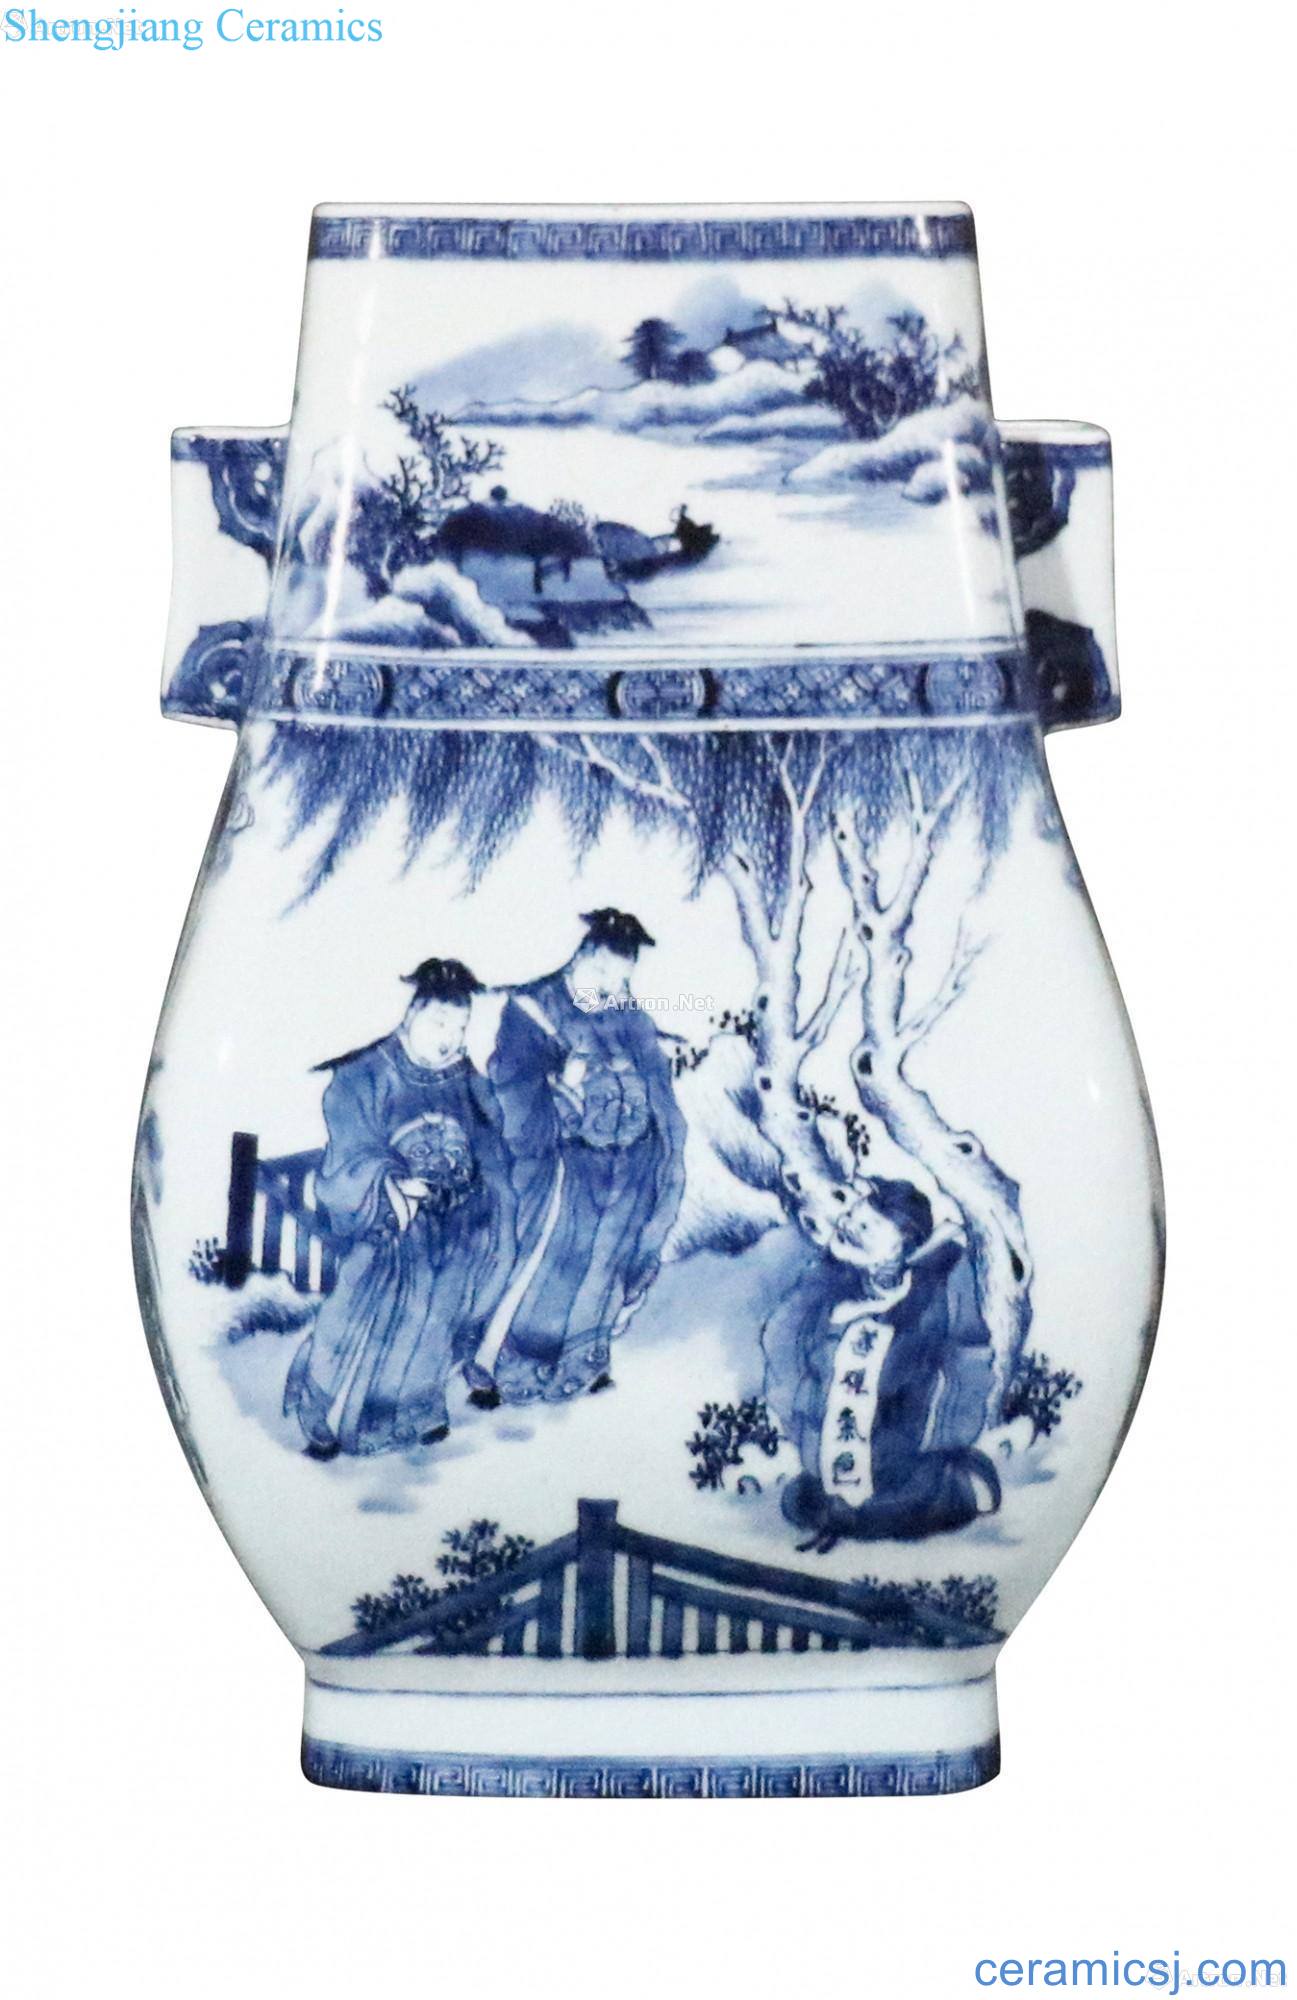 Stories of blue and white ear square bottles